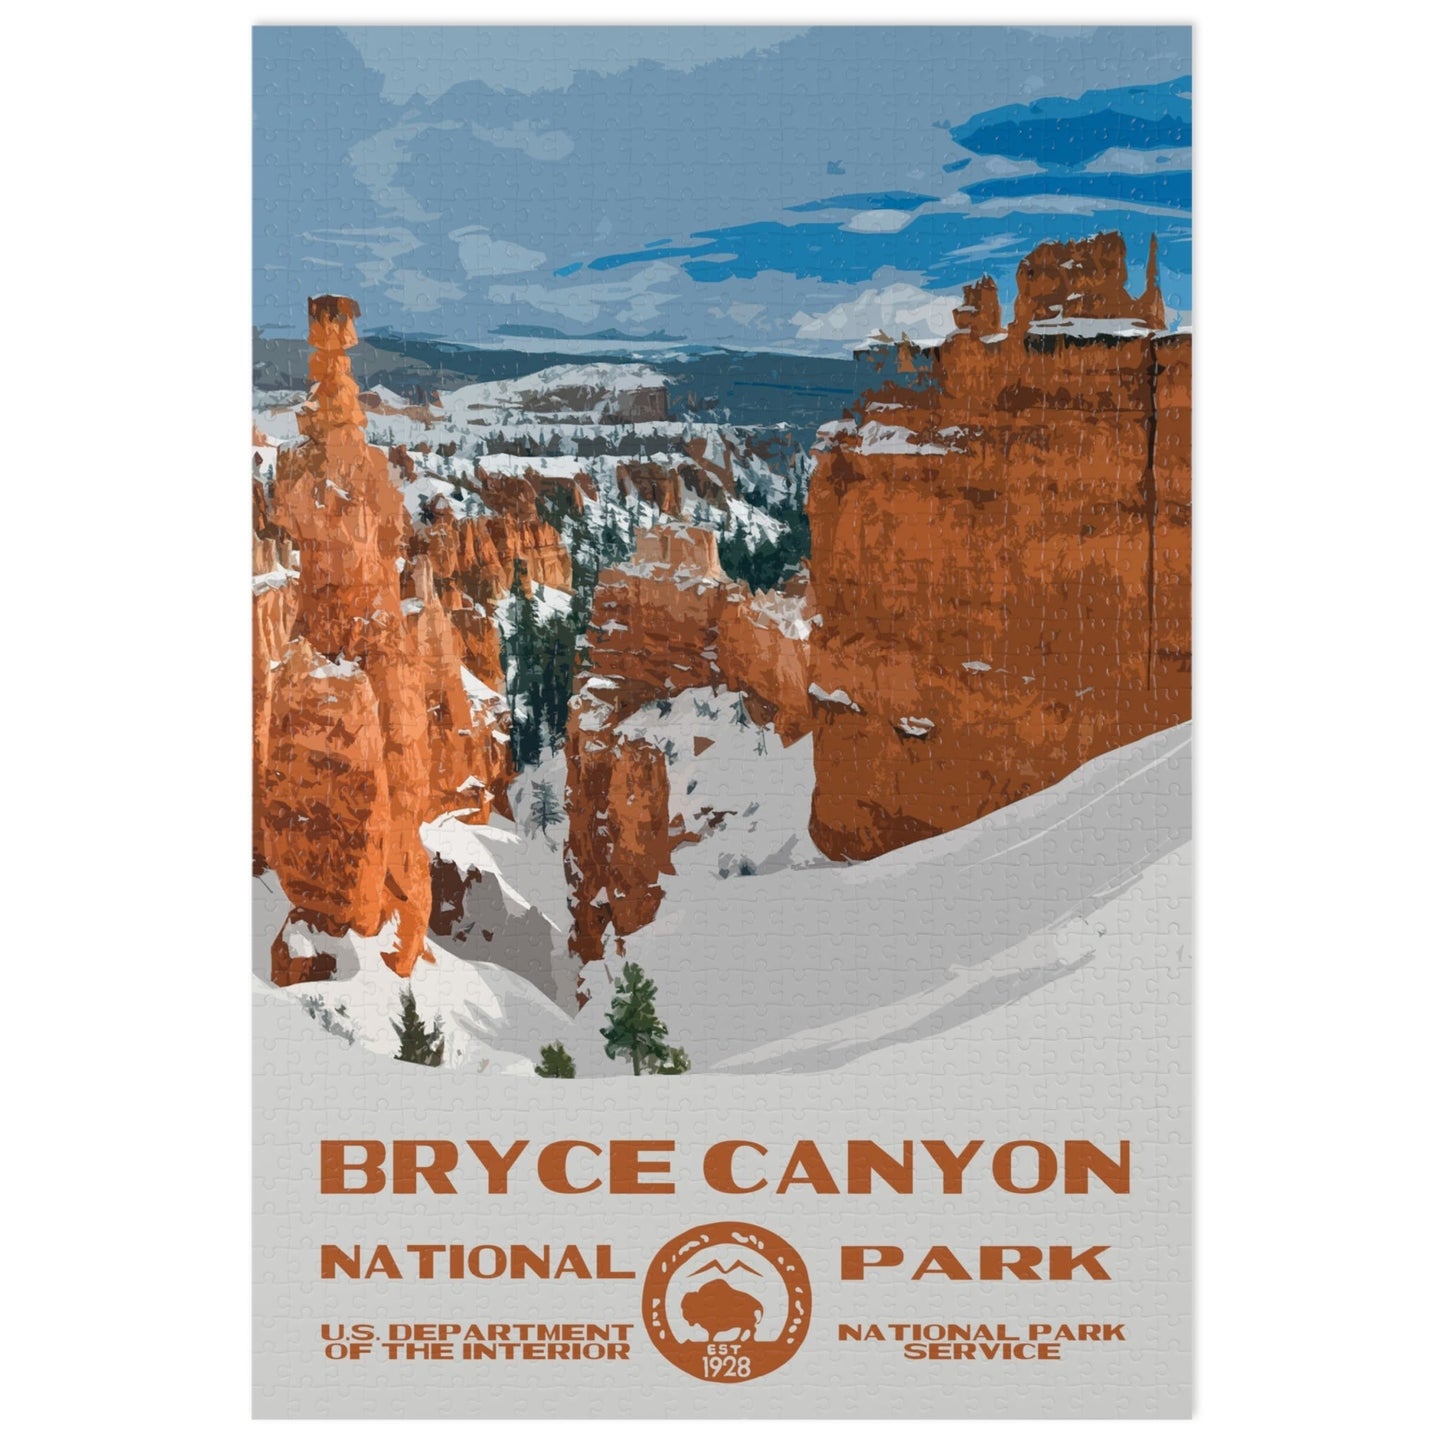 Bryce Canyon National Park Jigsaw Puzzle - 1000 Pieces